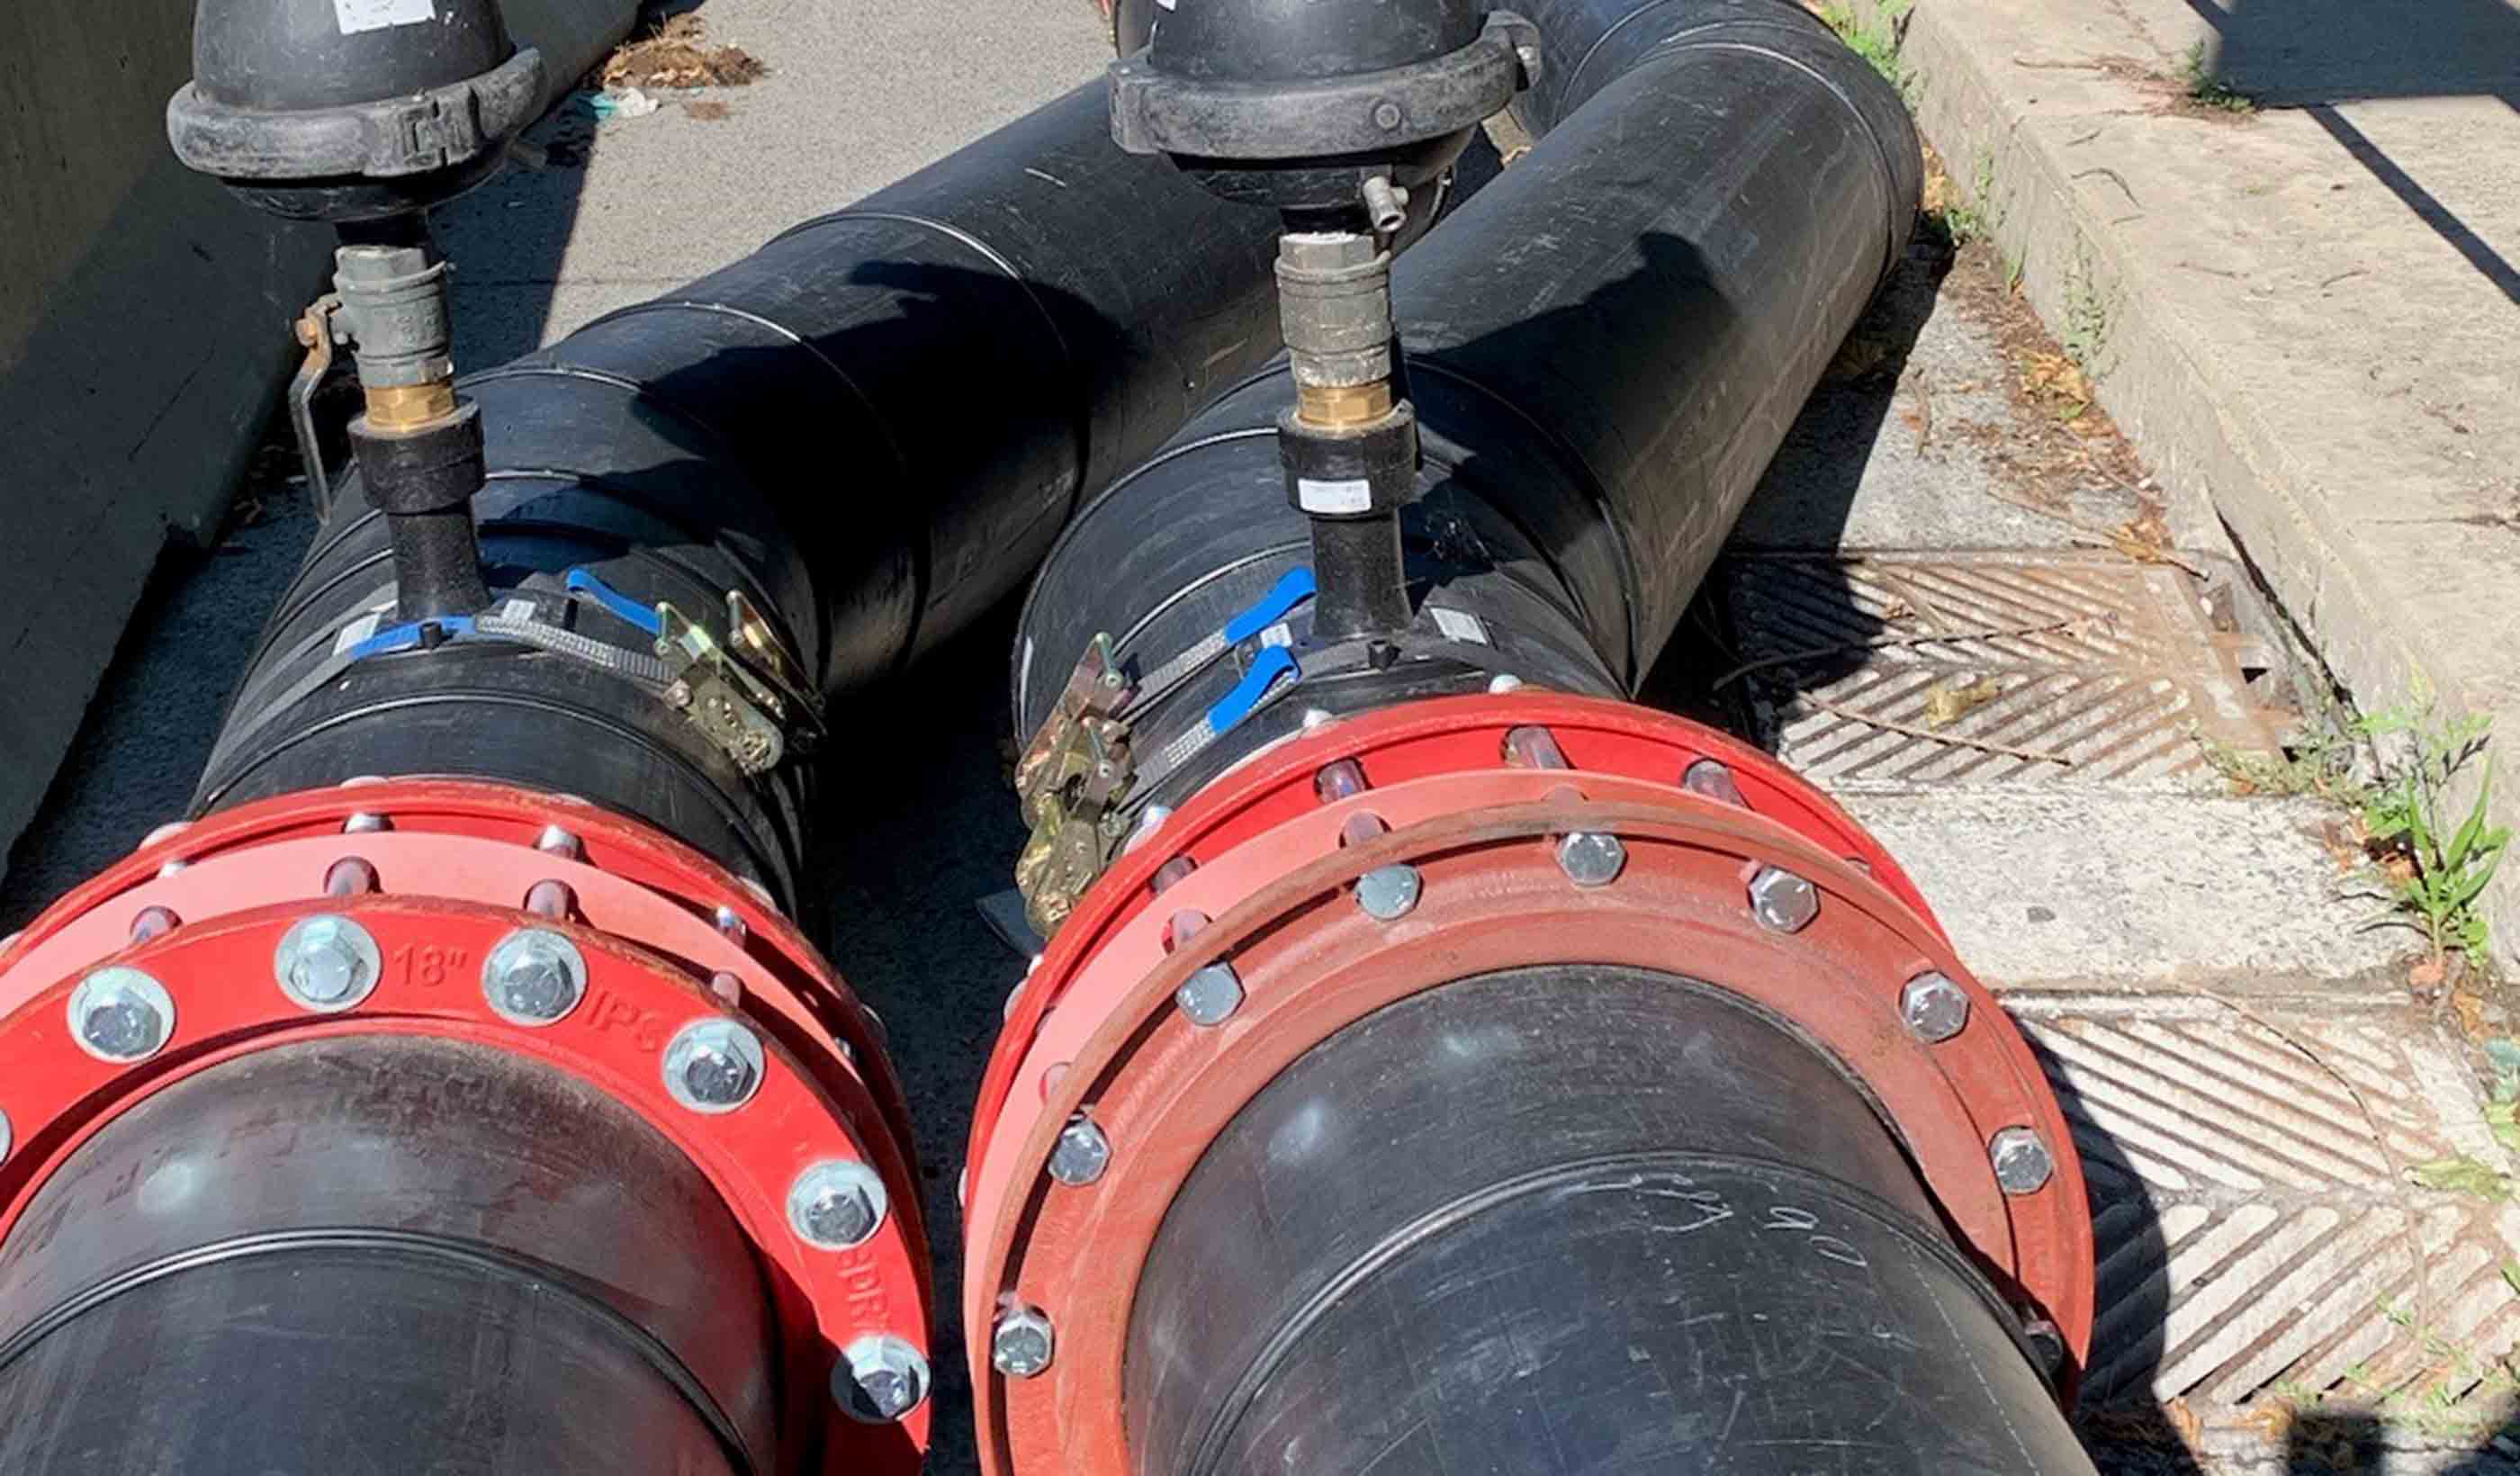 Multi-pronged trenchless rehab approach